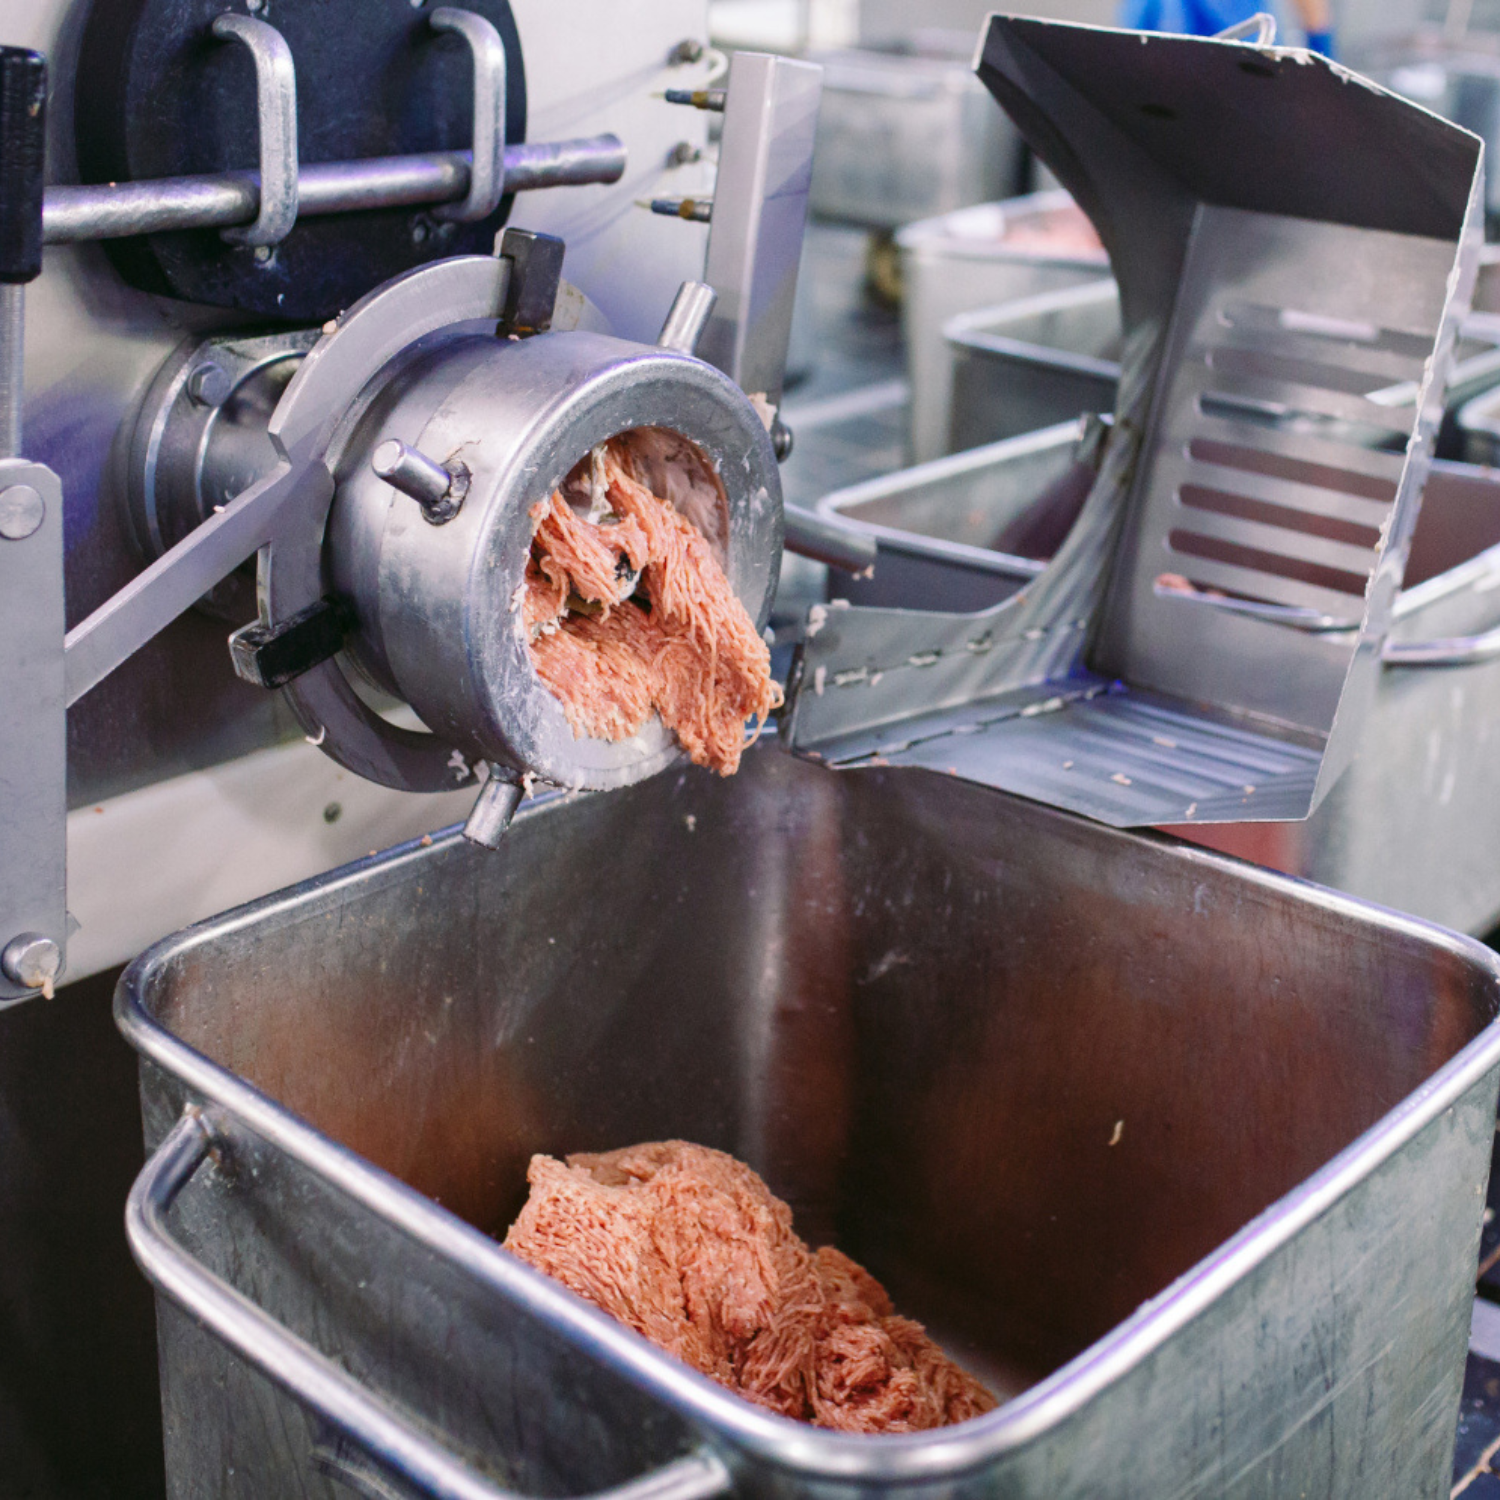 Production machine grinding and mincing meat